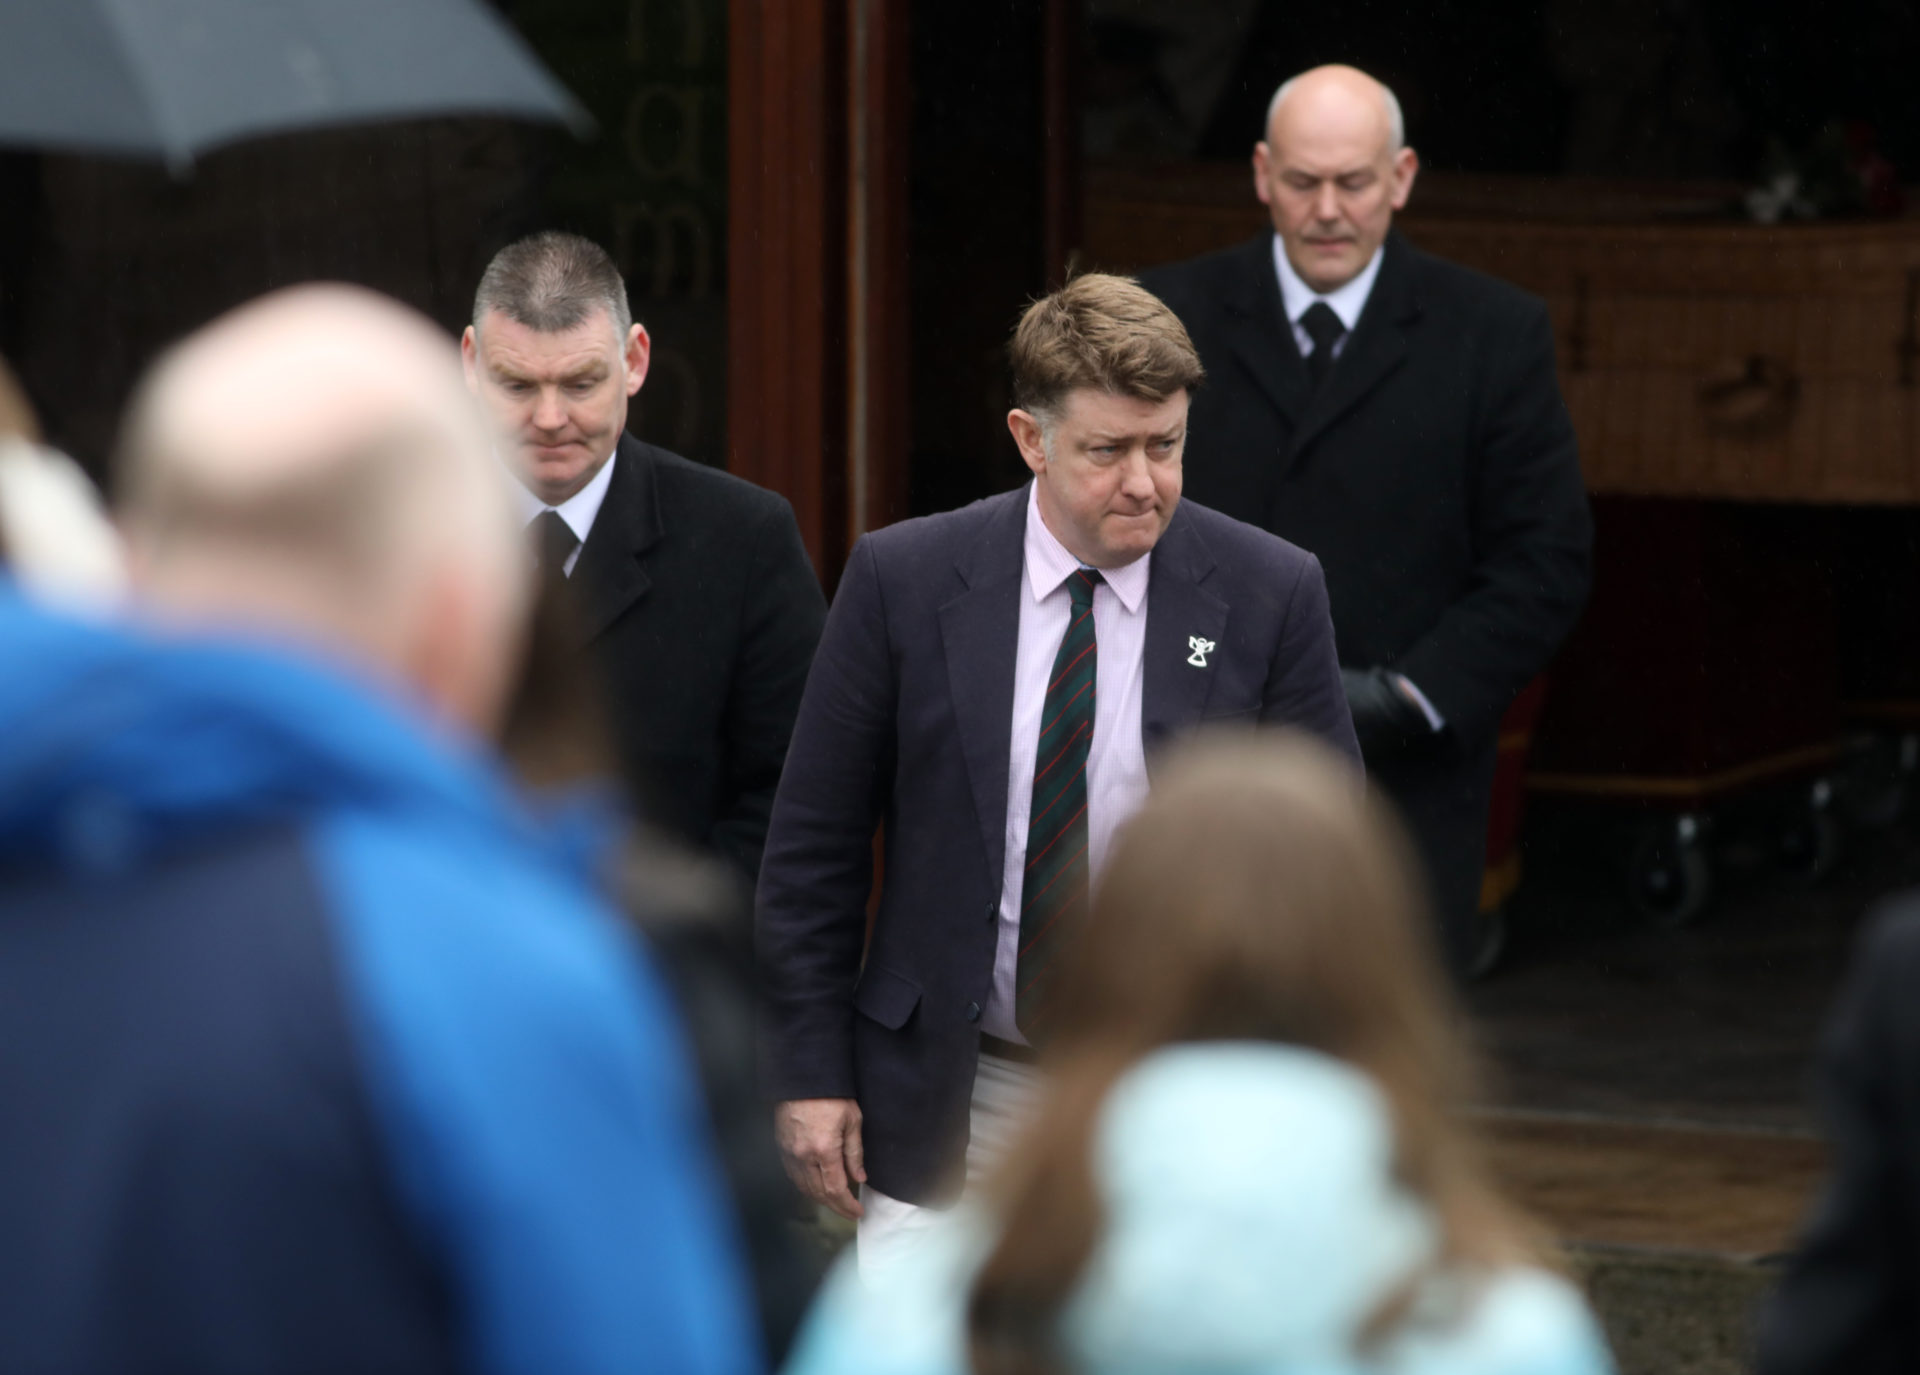  David Bowden arrives at St Eunan's Church in Raphoe, Co Donegal for the funeral of Una, Ciara and Saoirse, 3-4-24. 